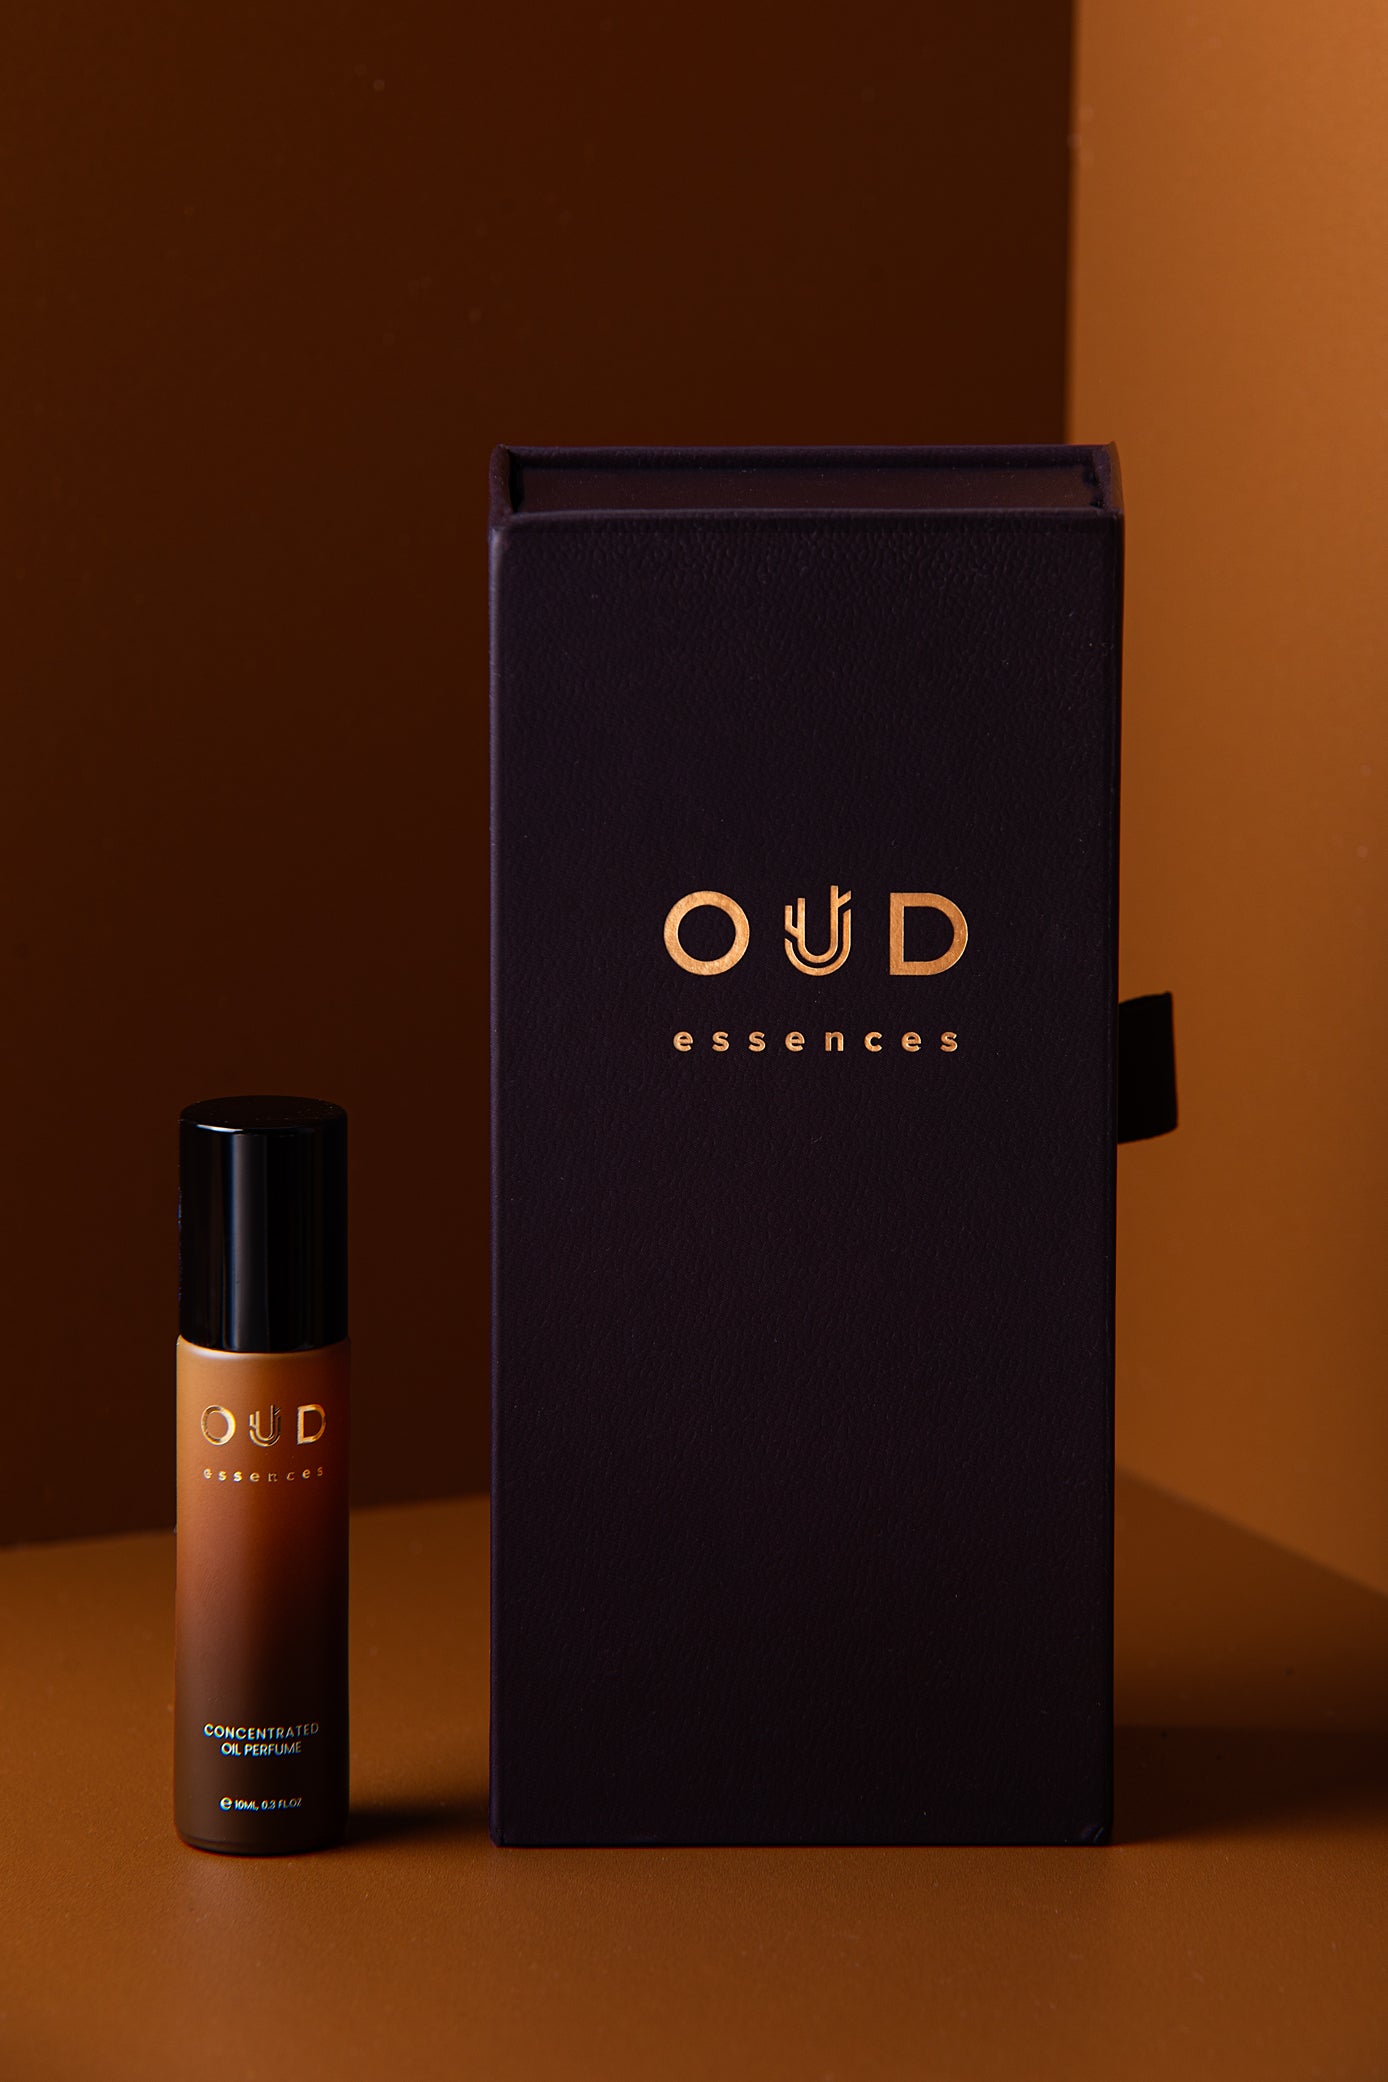 Roll on perfume by OUD essences